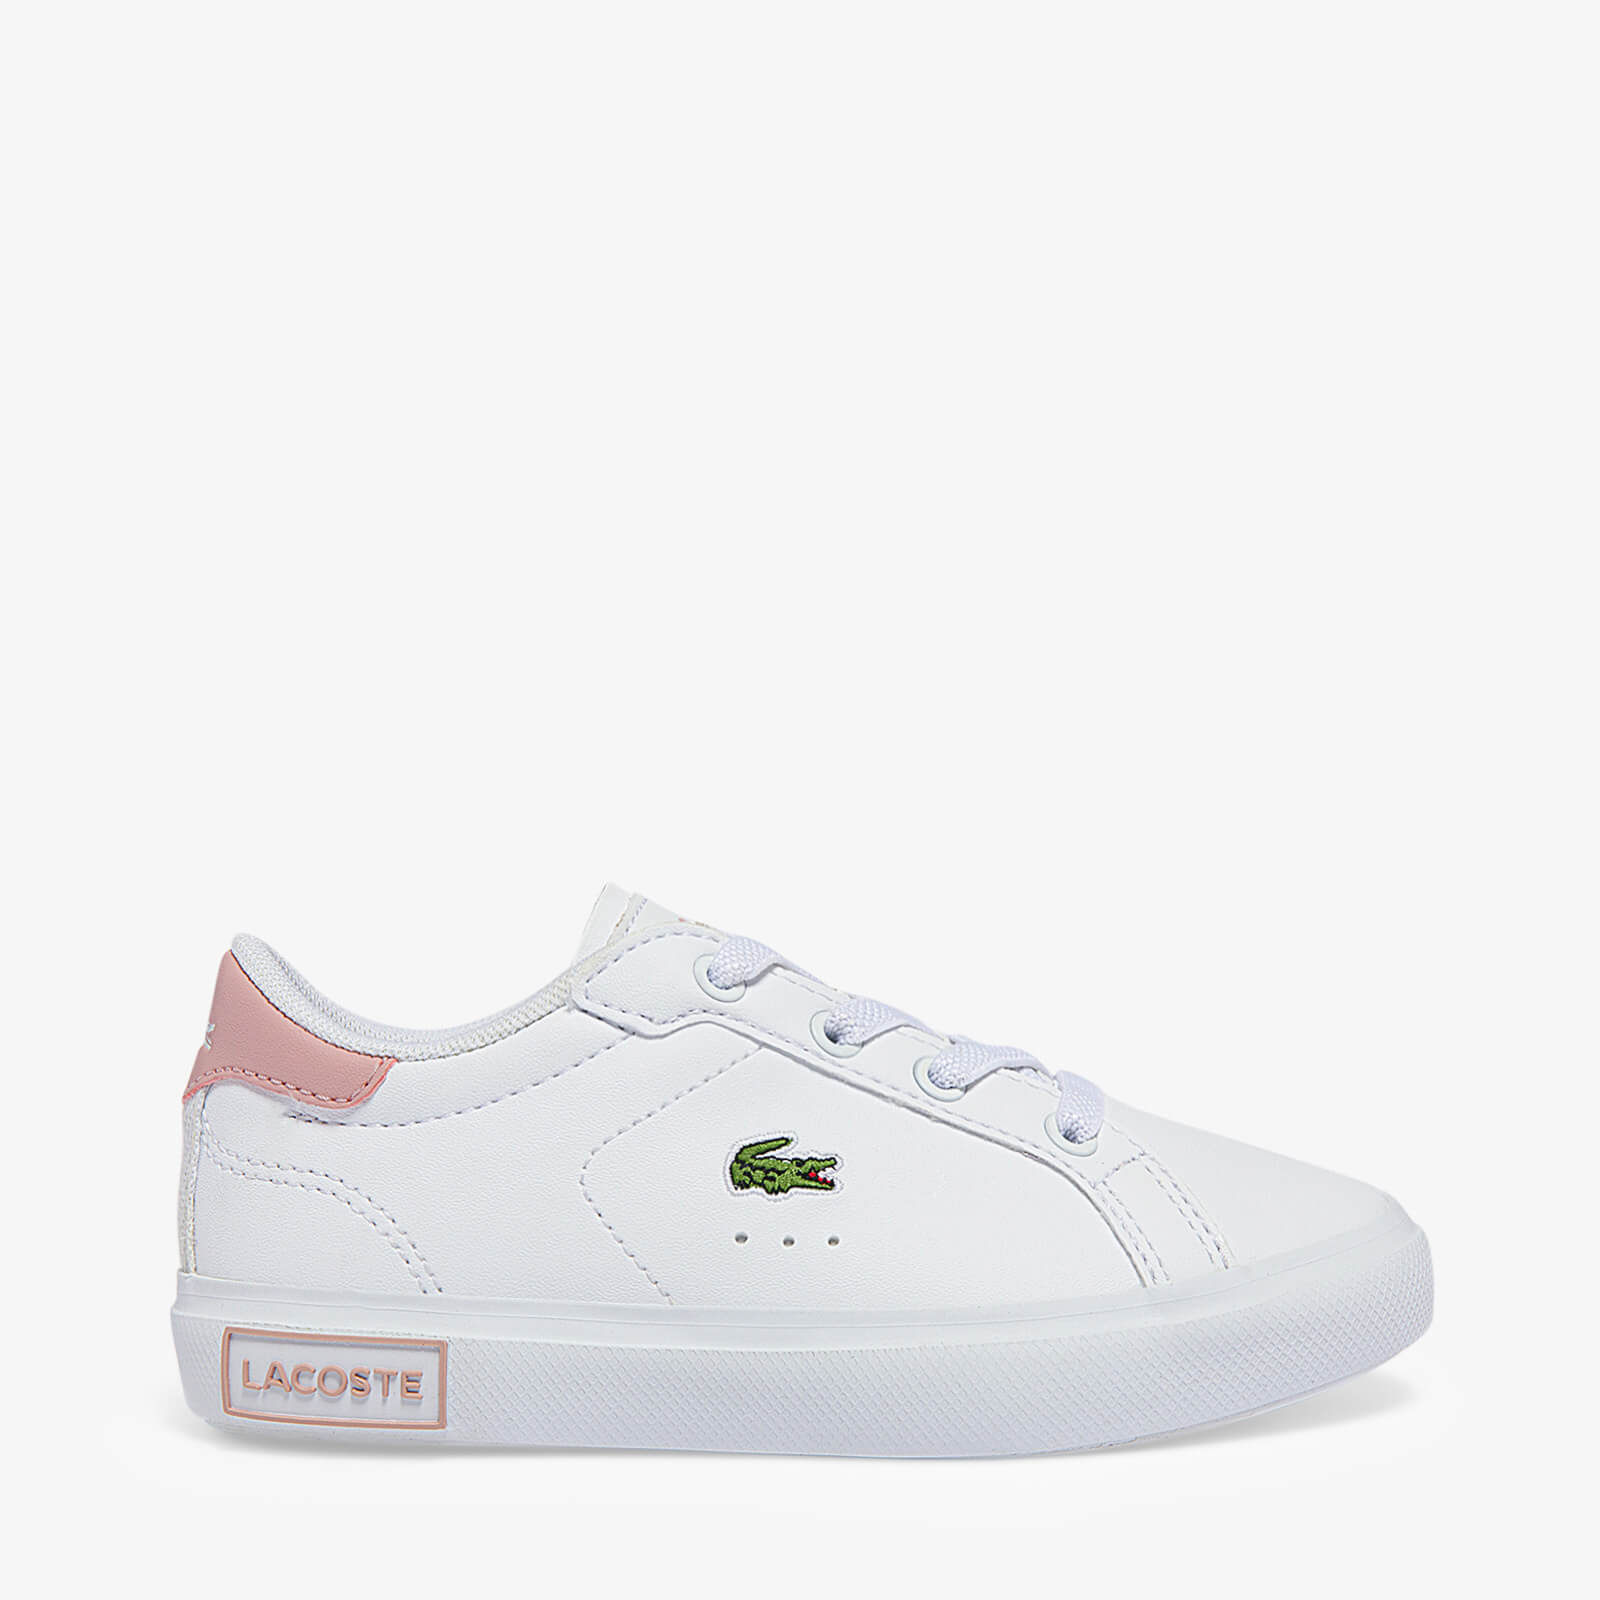 Lacoste Infant Powercourt 0721 Trainers - White/Pink - UK 5 Toddler